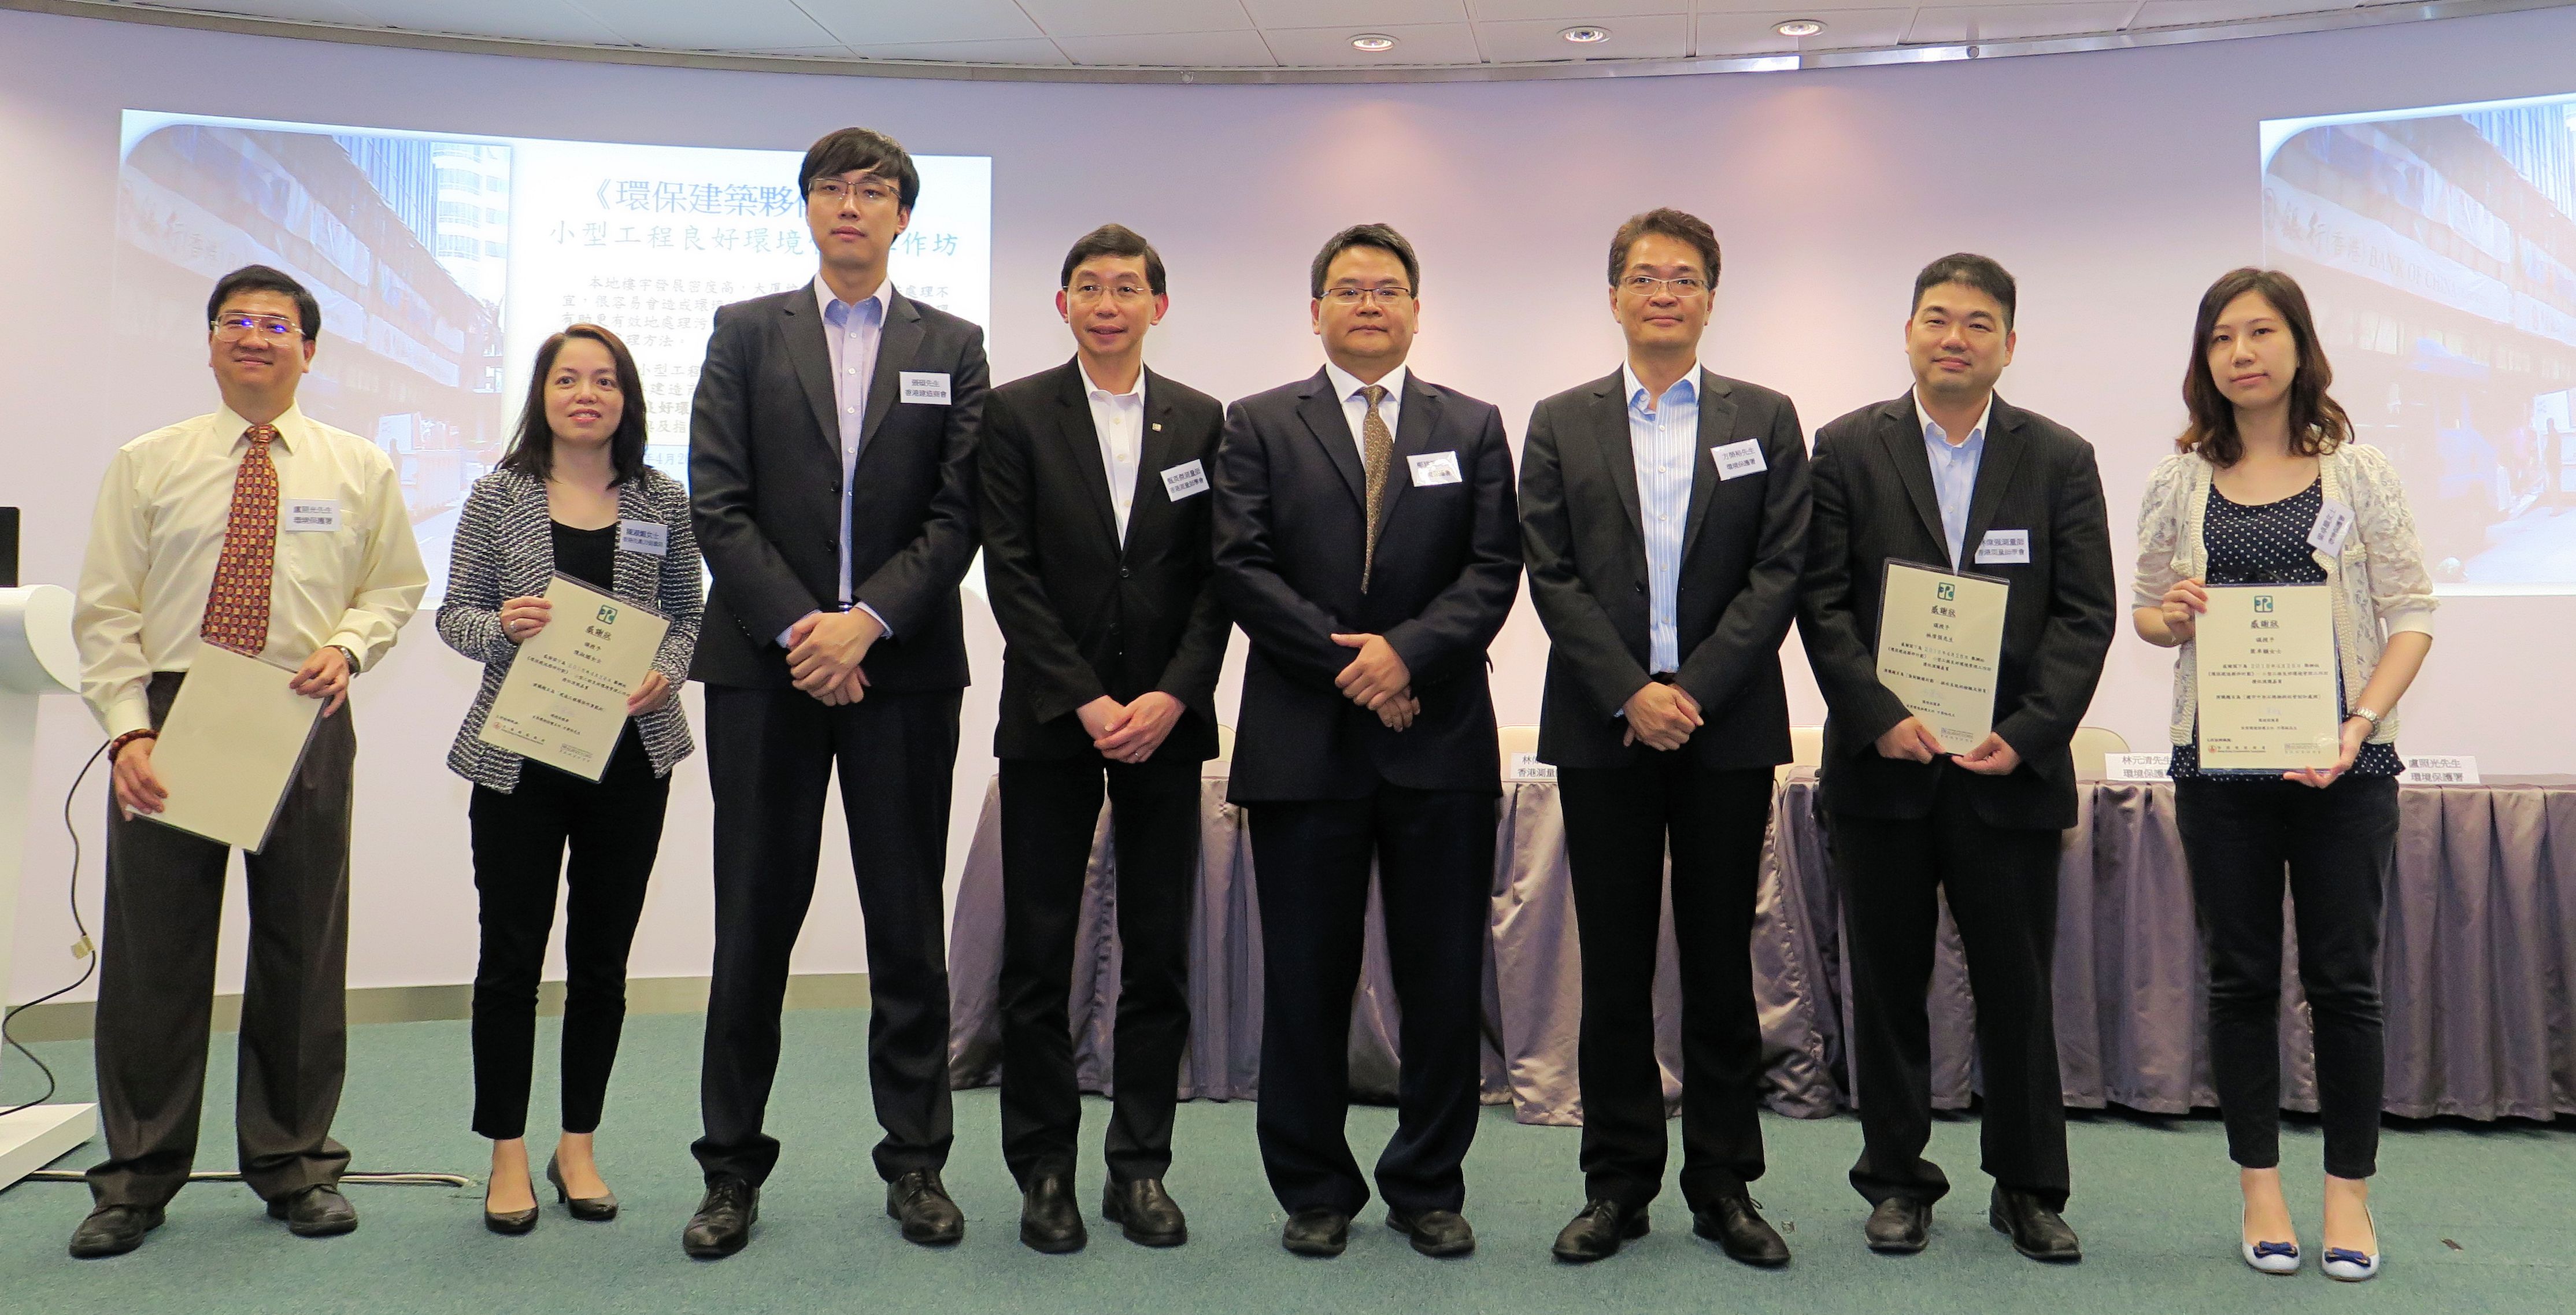 REPRESENTATIVES FROM THE HONG KONG CONSTRUCTION ASSOCIATION, THE HONG KONG INSTITUTE OF SURVEYORS AND THE ENVIRONMENTAL PROTECTION DEPARTMENT IN A GROUP PHOTO.